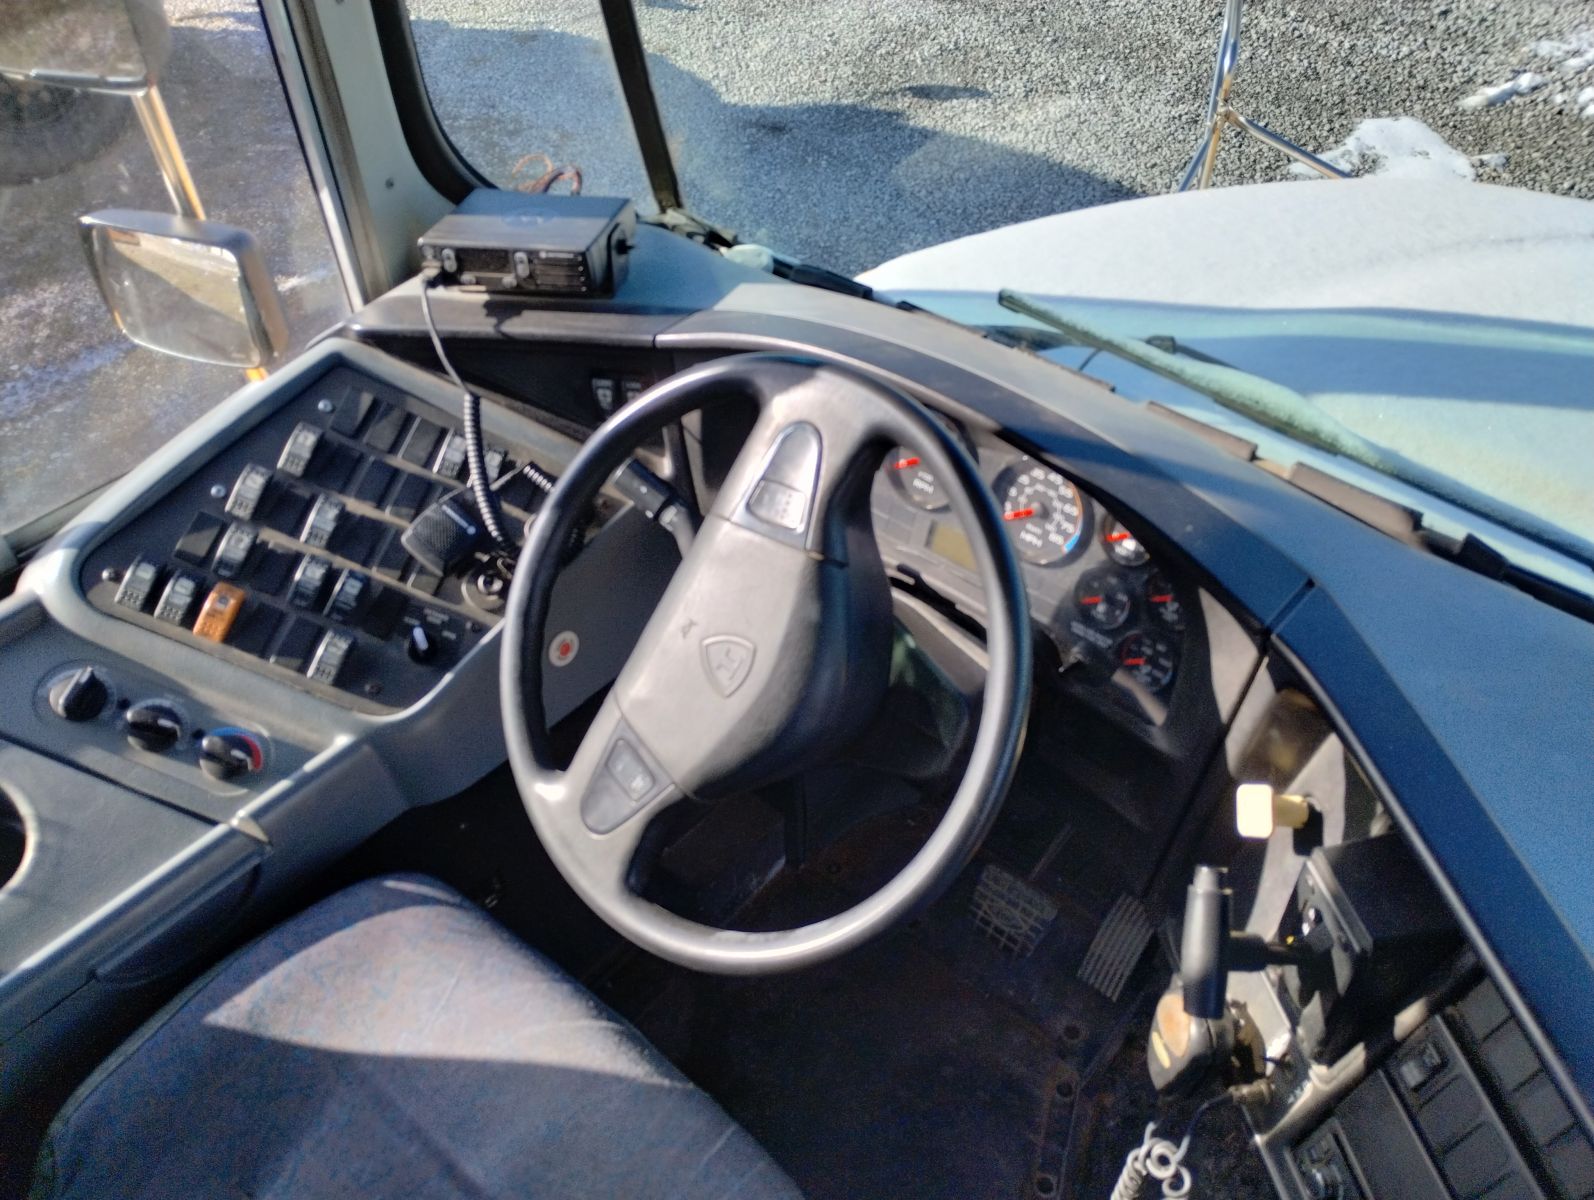 An image of a school bus dashboard.